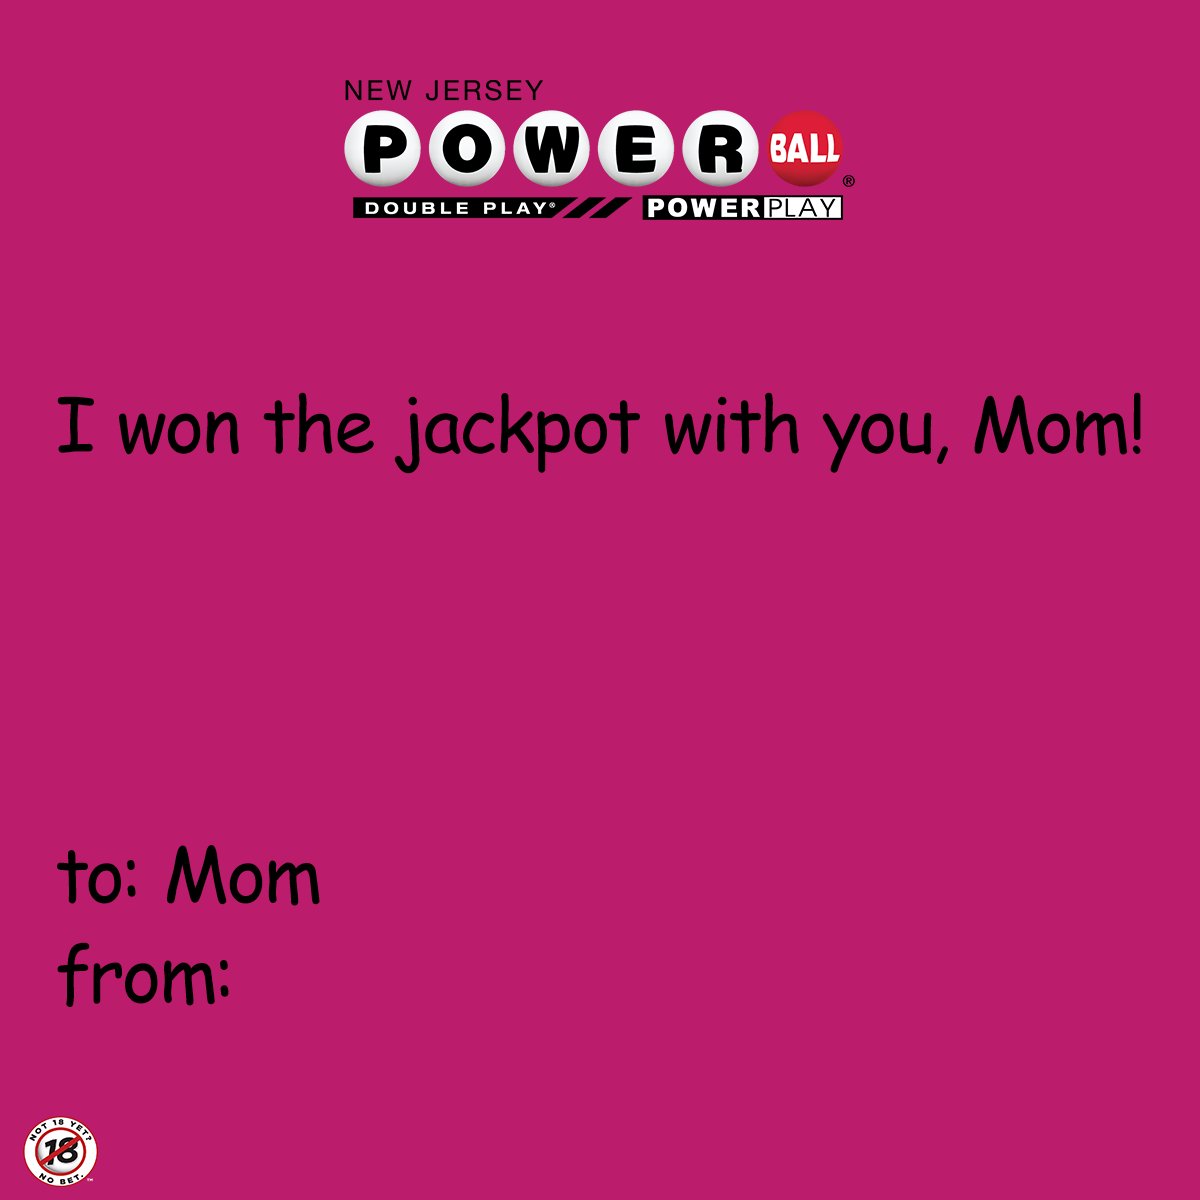 Send to your mom. 💕 #MothersDay . . . . Odds vary based on game played; for details visit NJLottery.com.